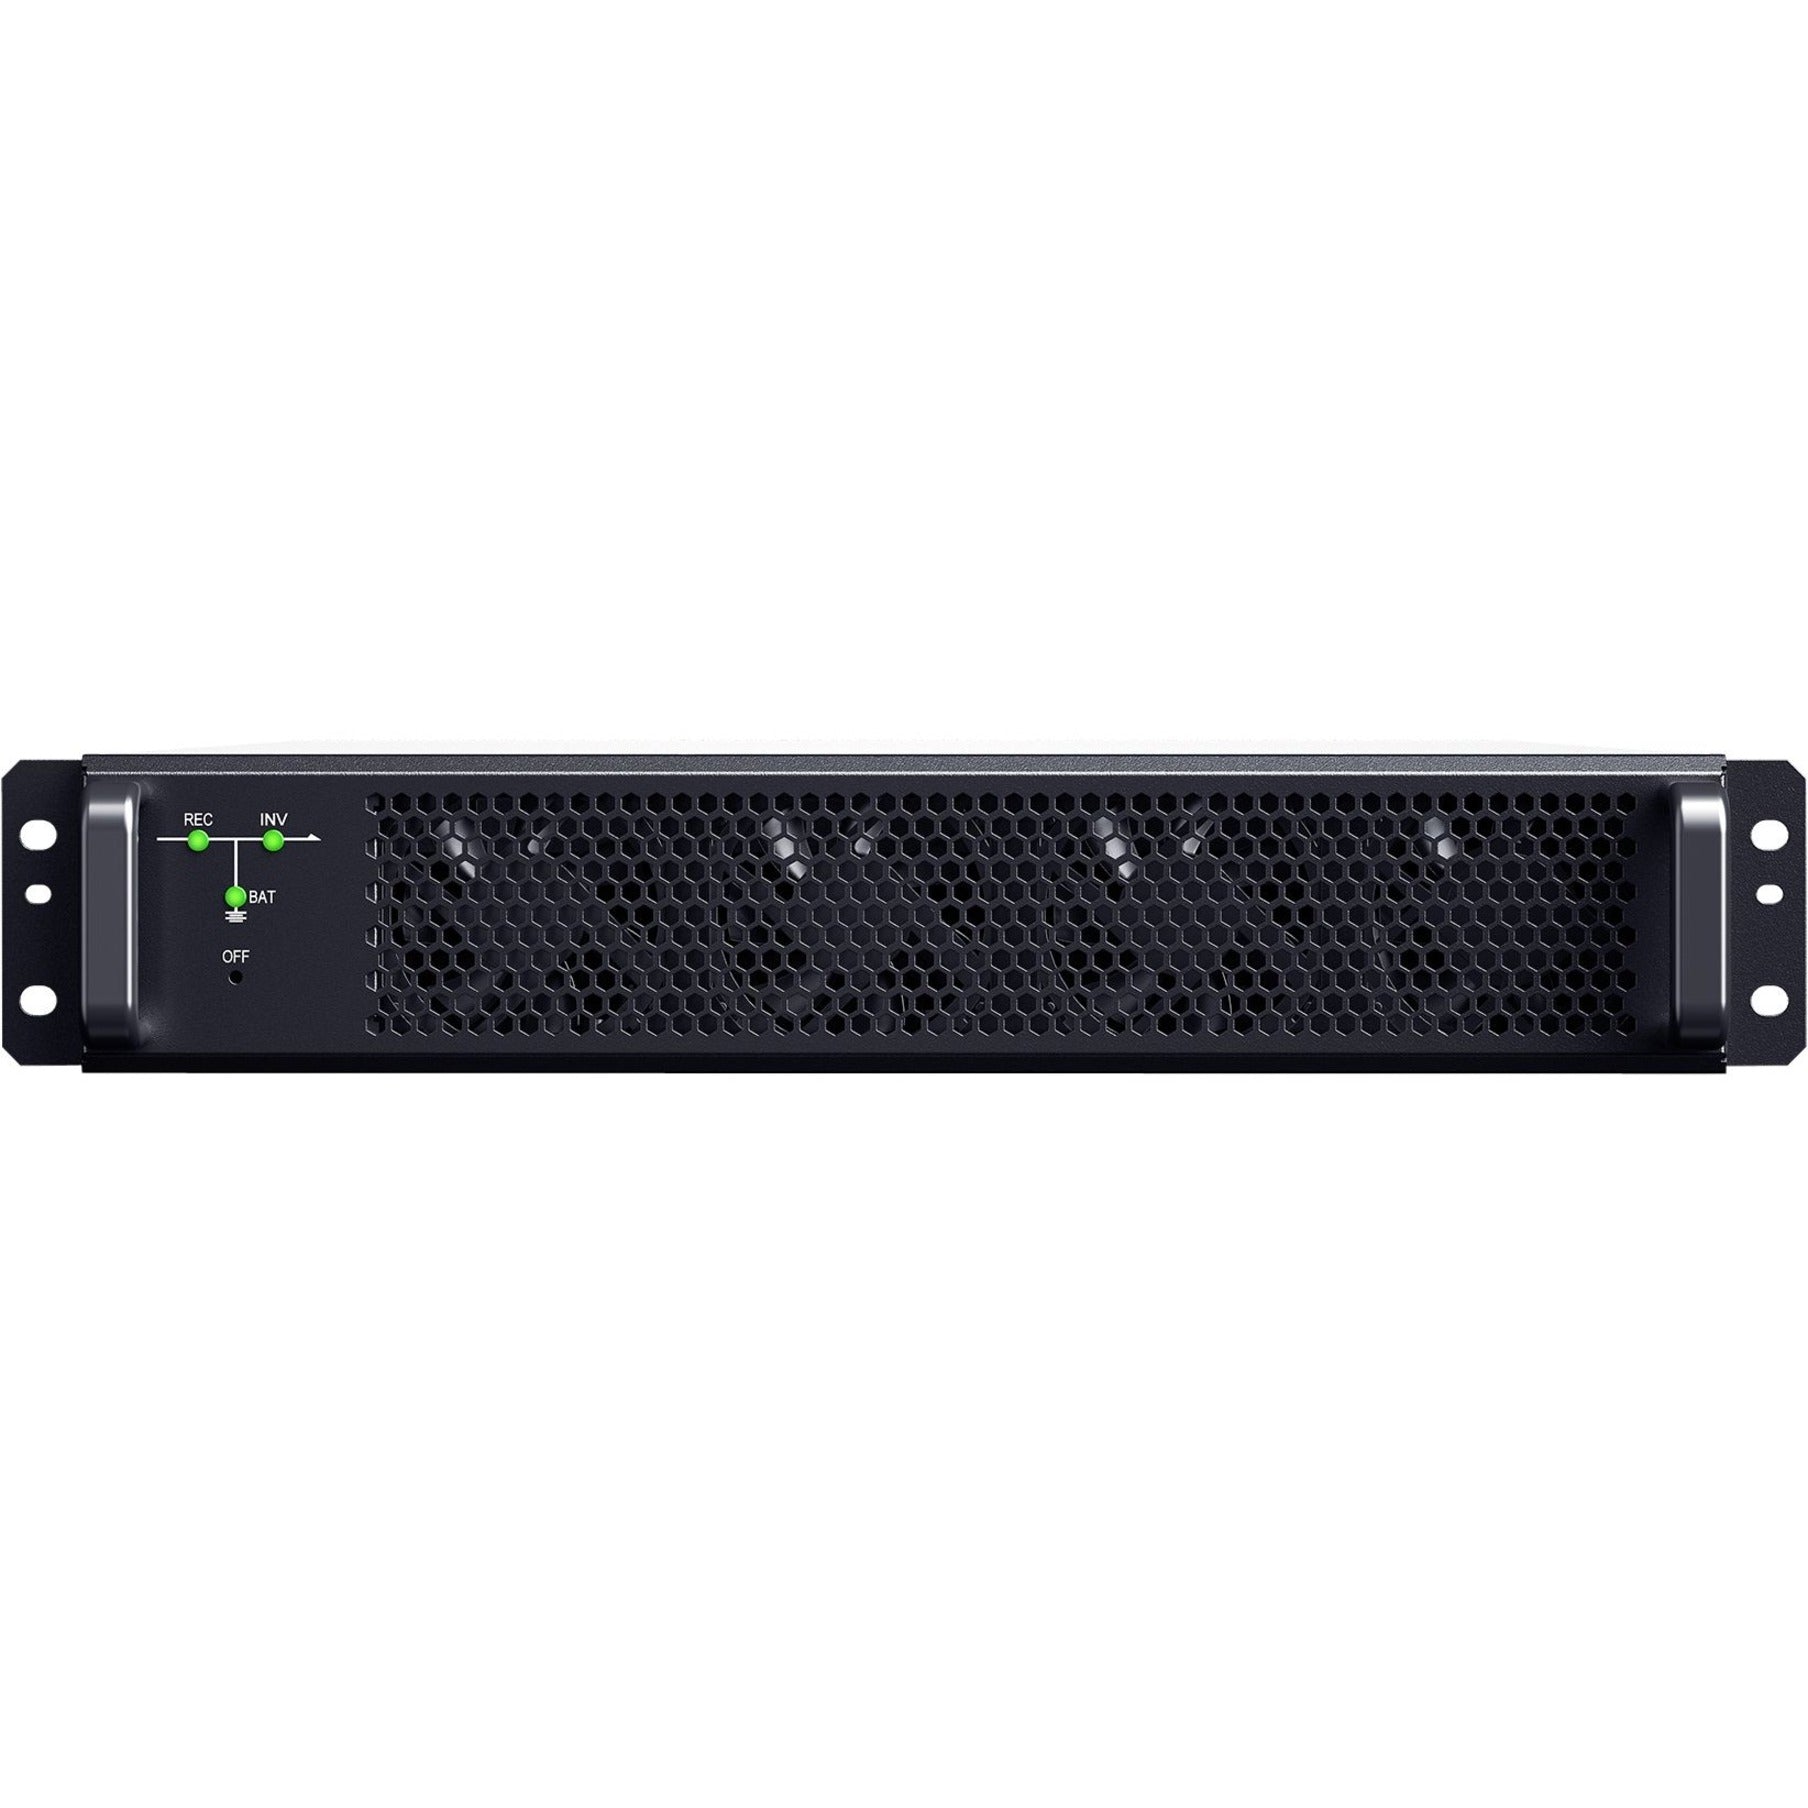 CyberPower SM10KAPMA 3-Phase Modular UPS Power Modules, 10kVA/10kW, Hot-swappable Batteries, Sine Wave Output